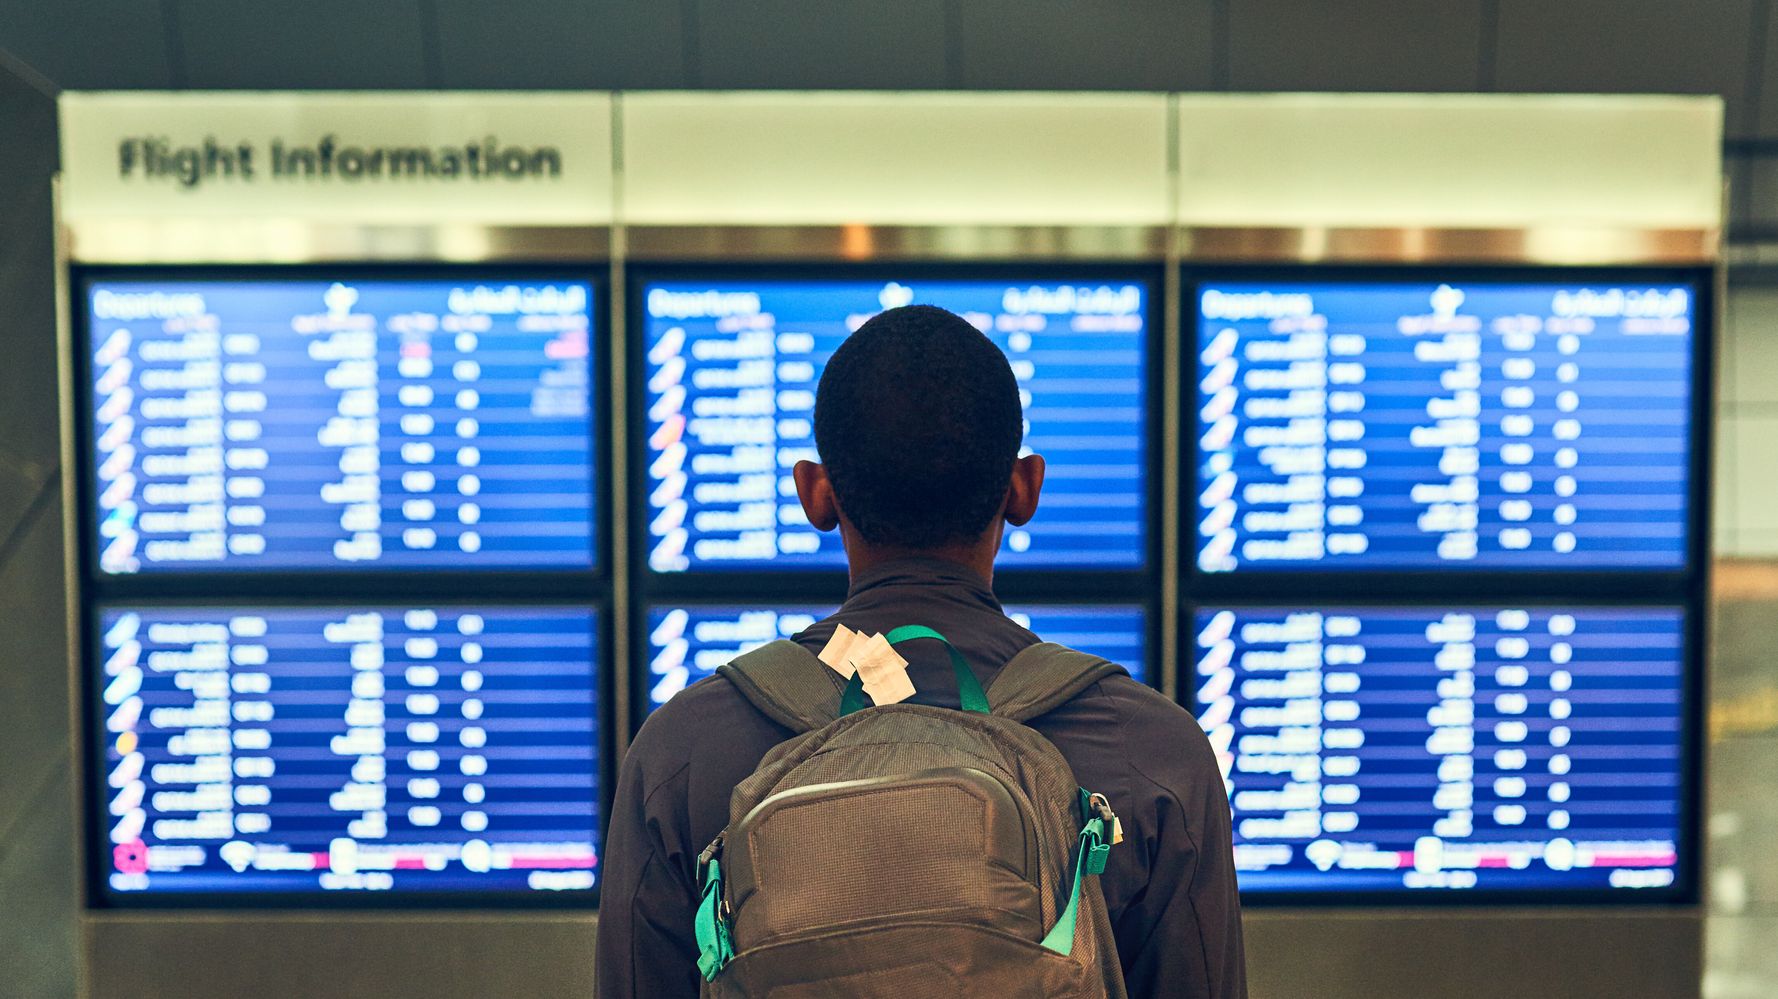 8 Secrets About Flight Delays You Need To Know Before Your Next Trip